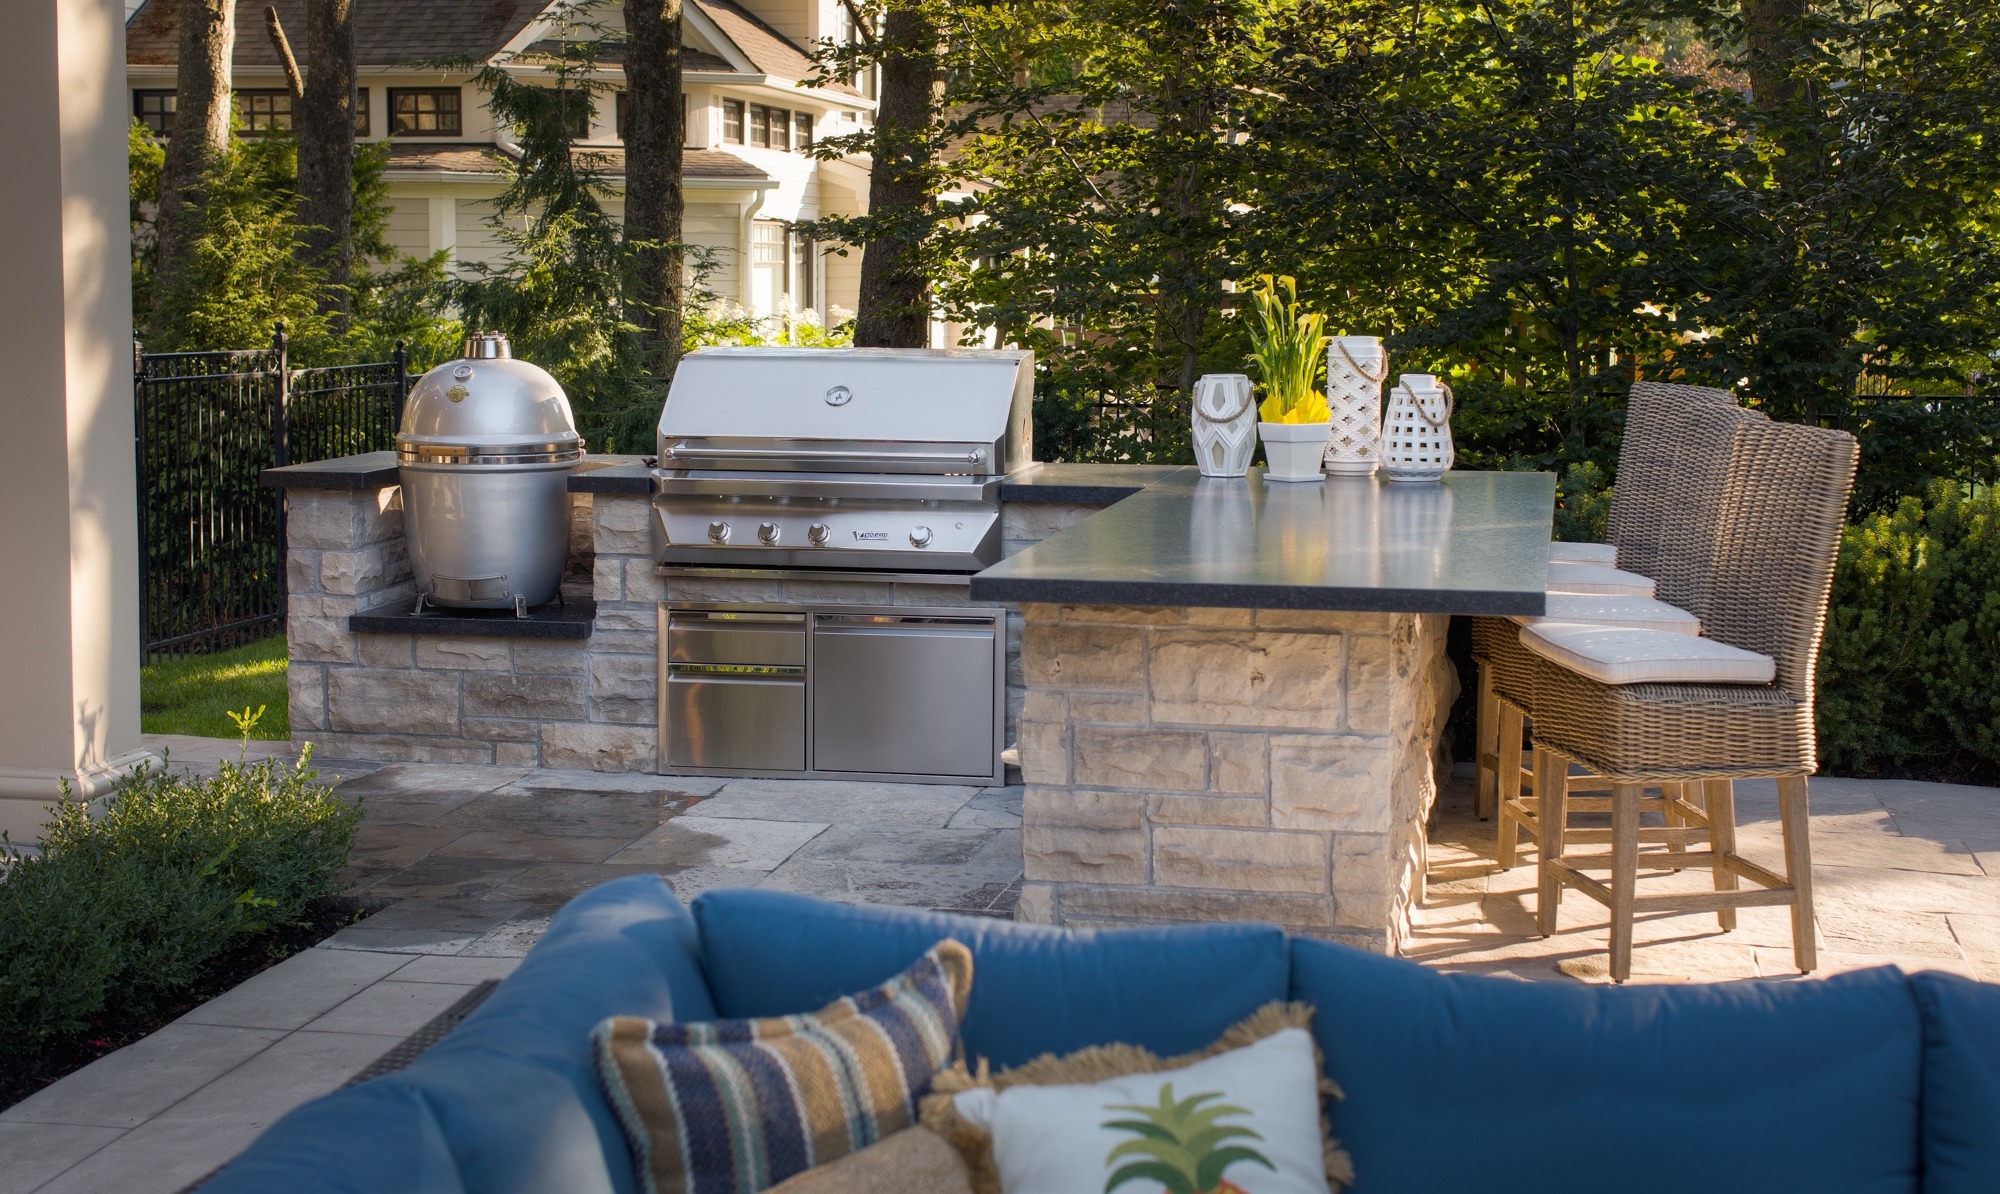 An outdoor kitchen setup with a grill, stone countertop, wicker chairs, decorative items, surrounded by greenery, and part of a seating area.